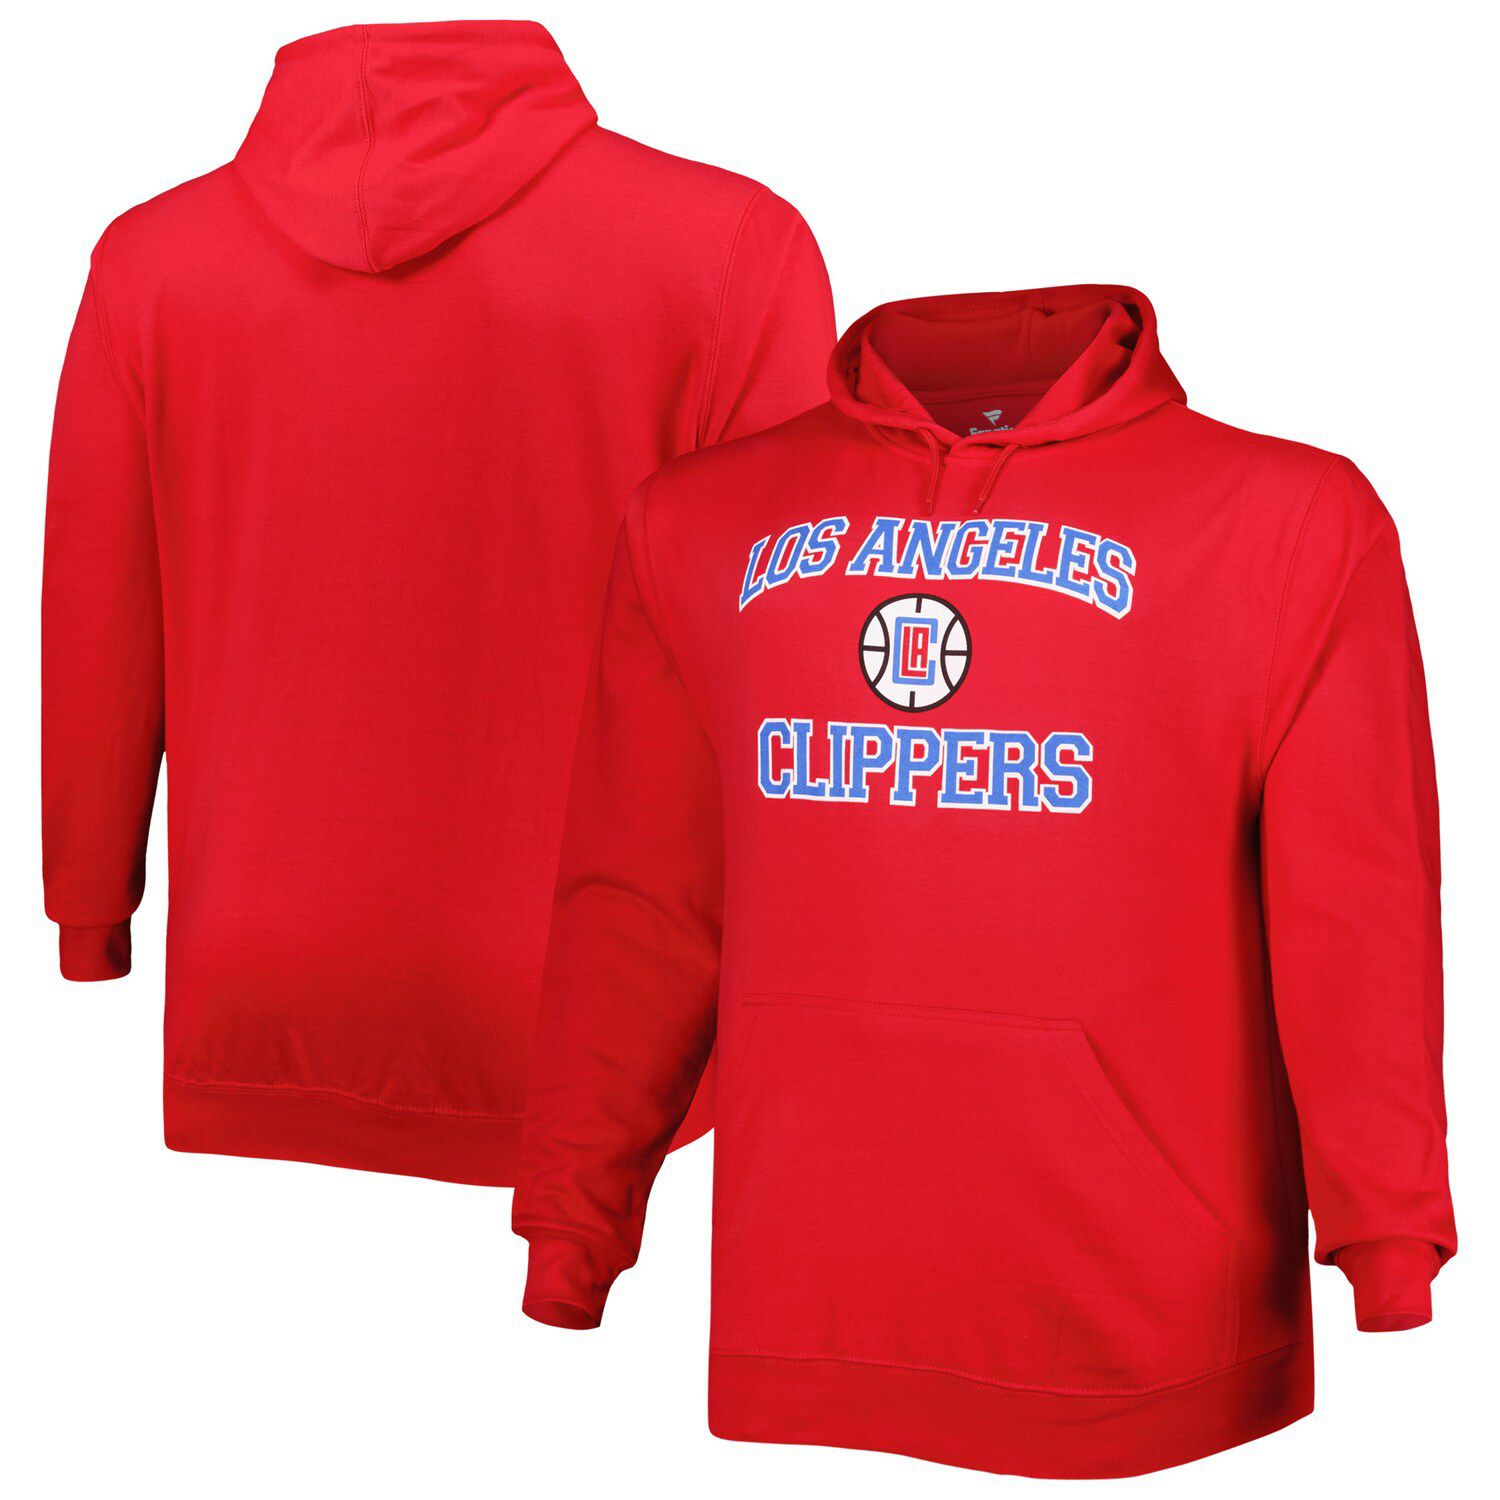 Men's Fanatics Branded Red St. Louis Cardinals Heart & Soul Pullover Hoodie